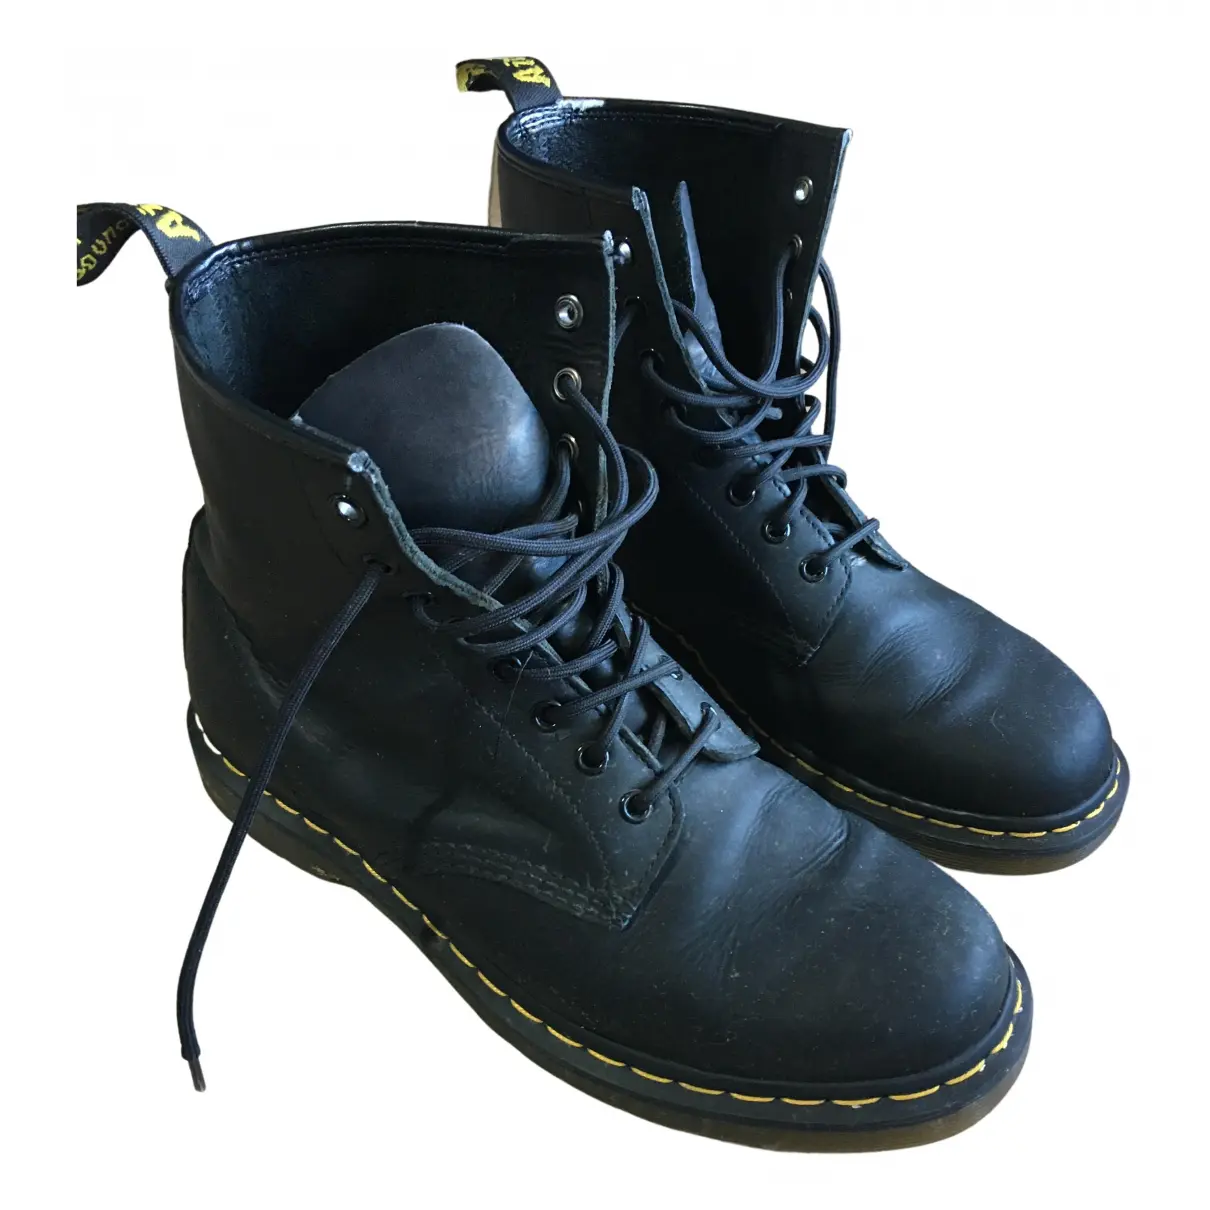 101 (6 eye) leather boots Dr. Martens